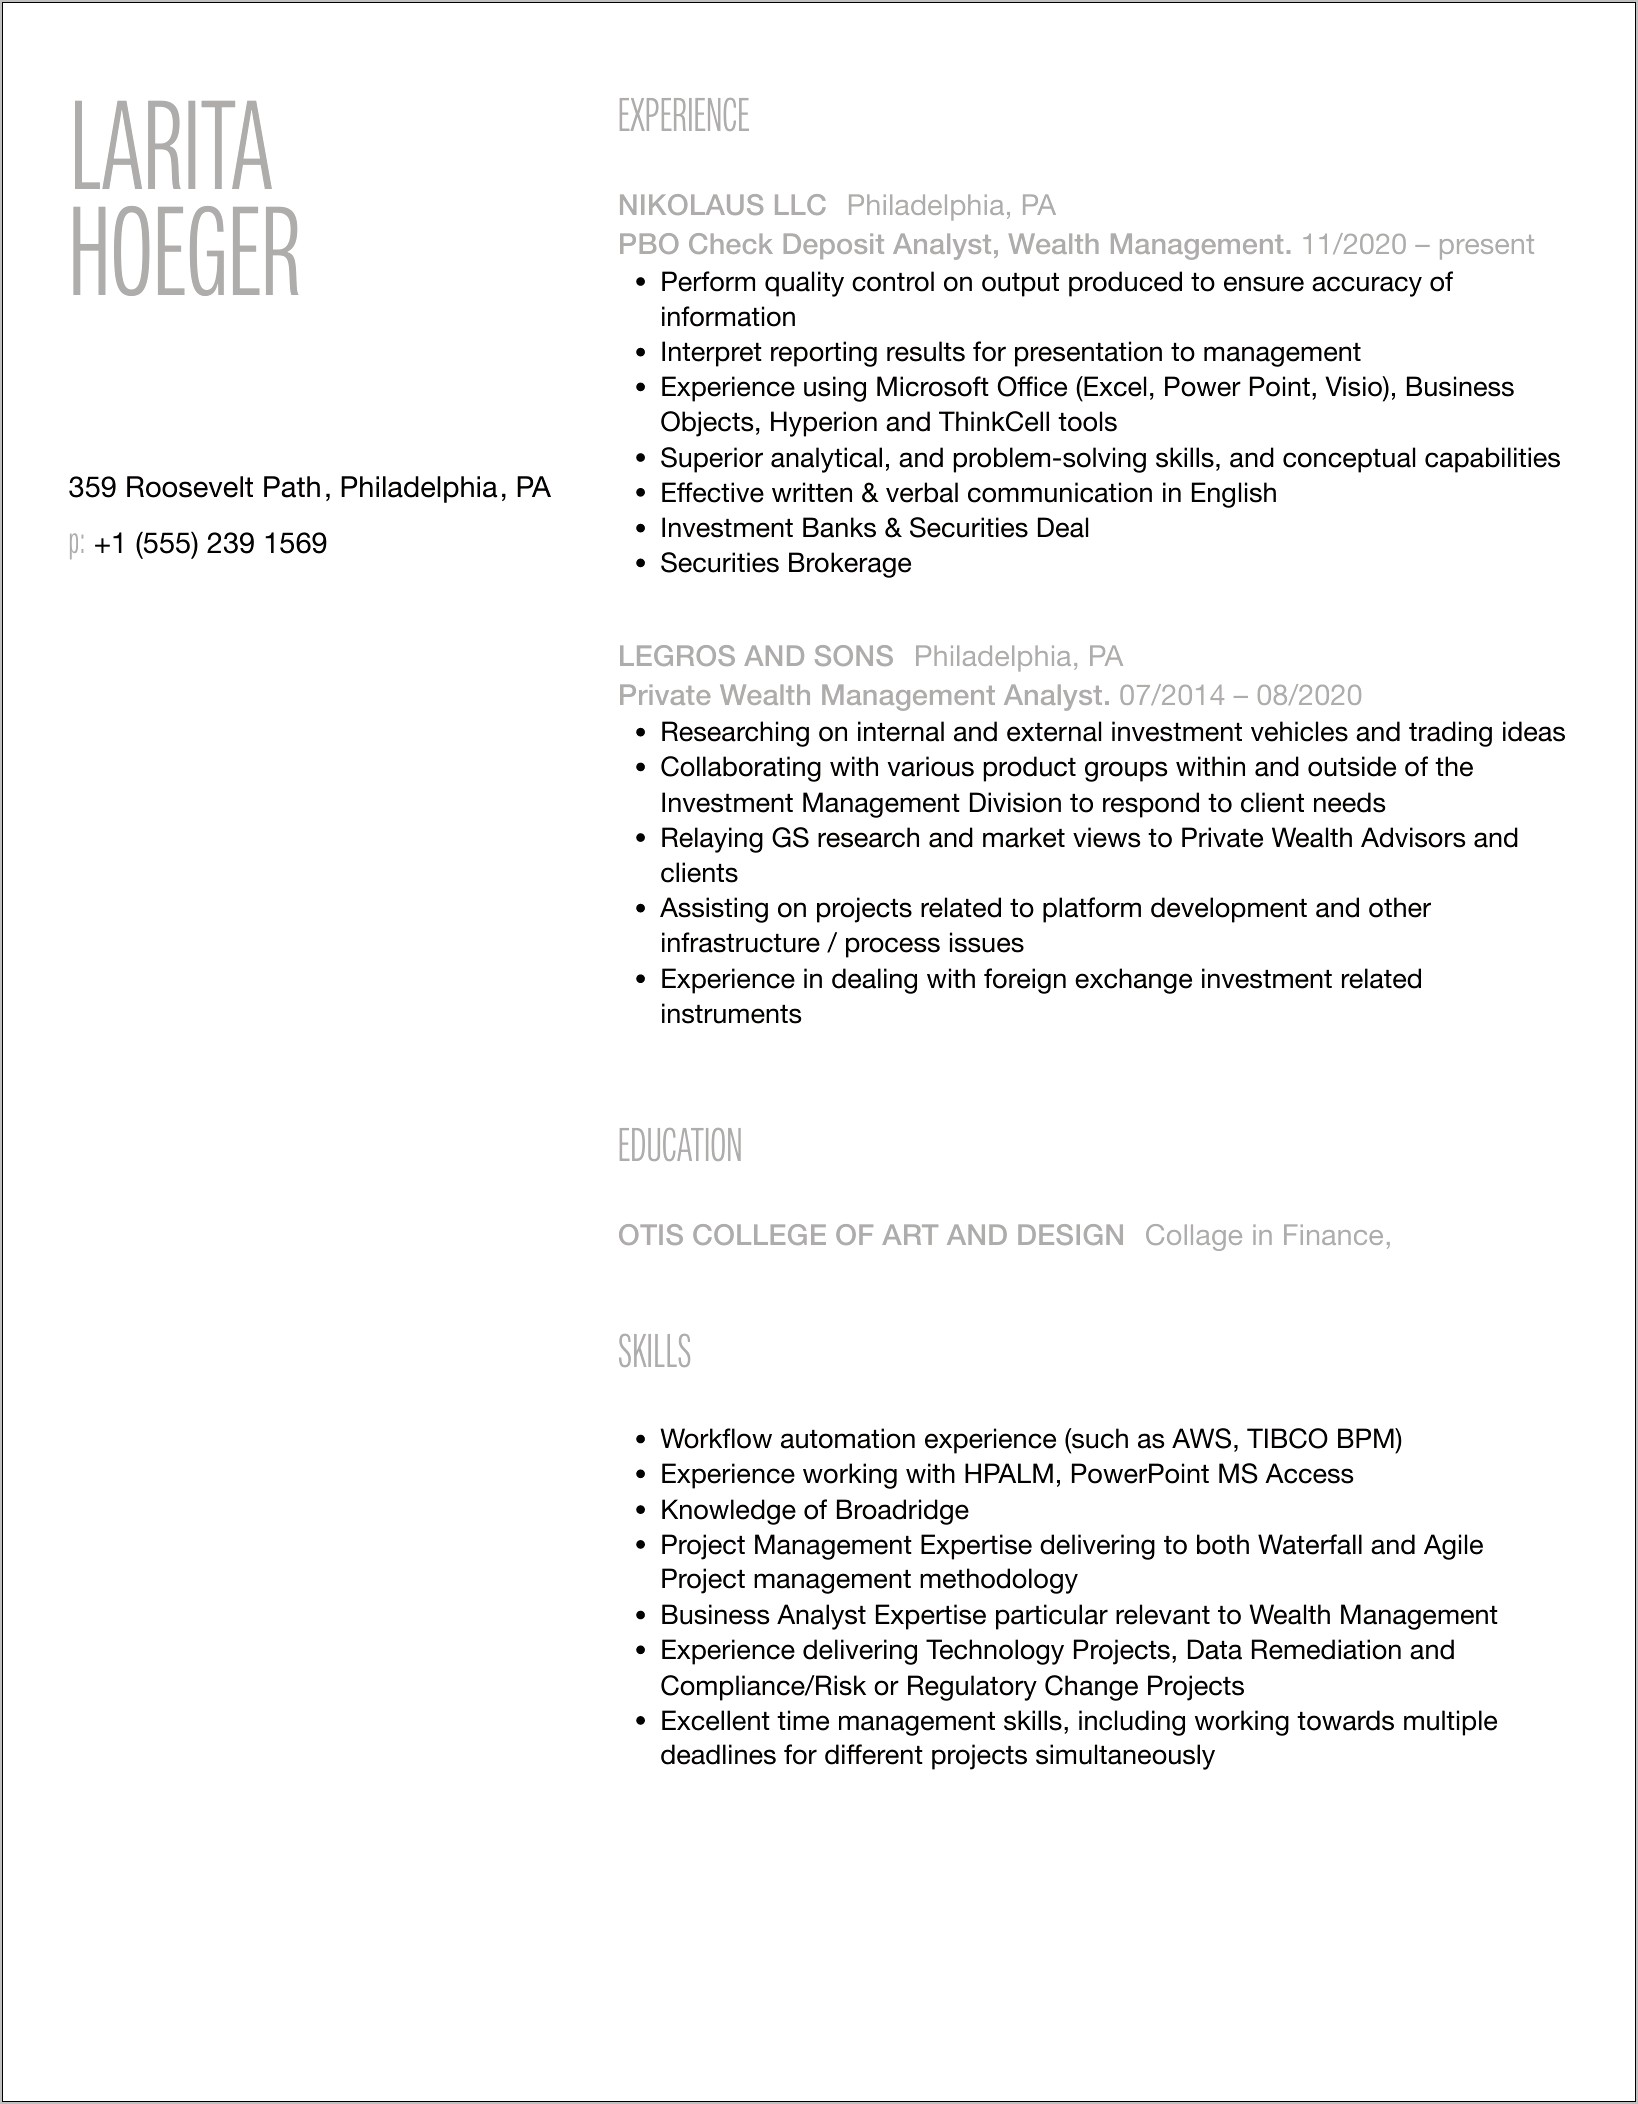 Resume For Wealth Management Analyst